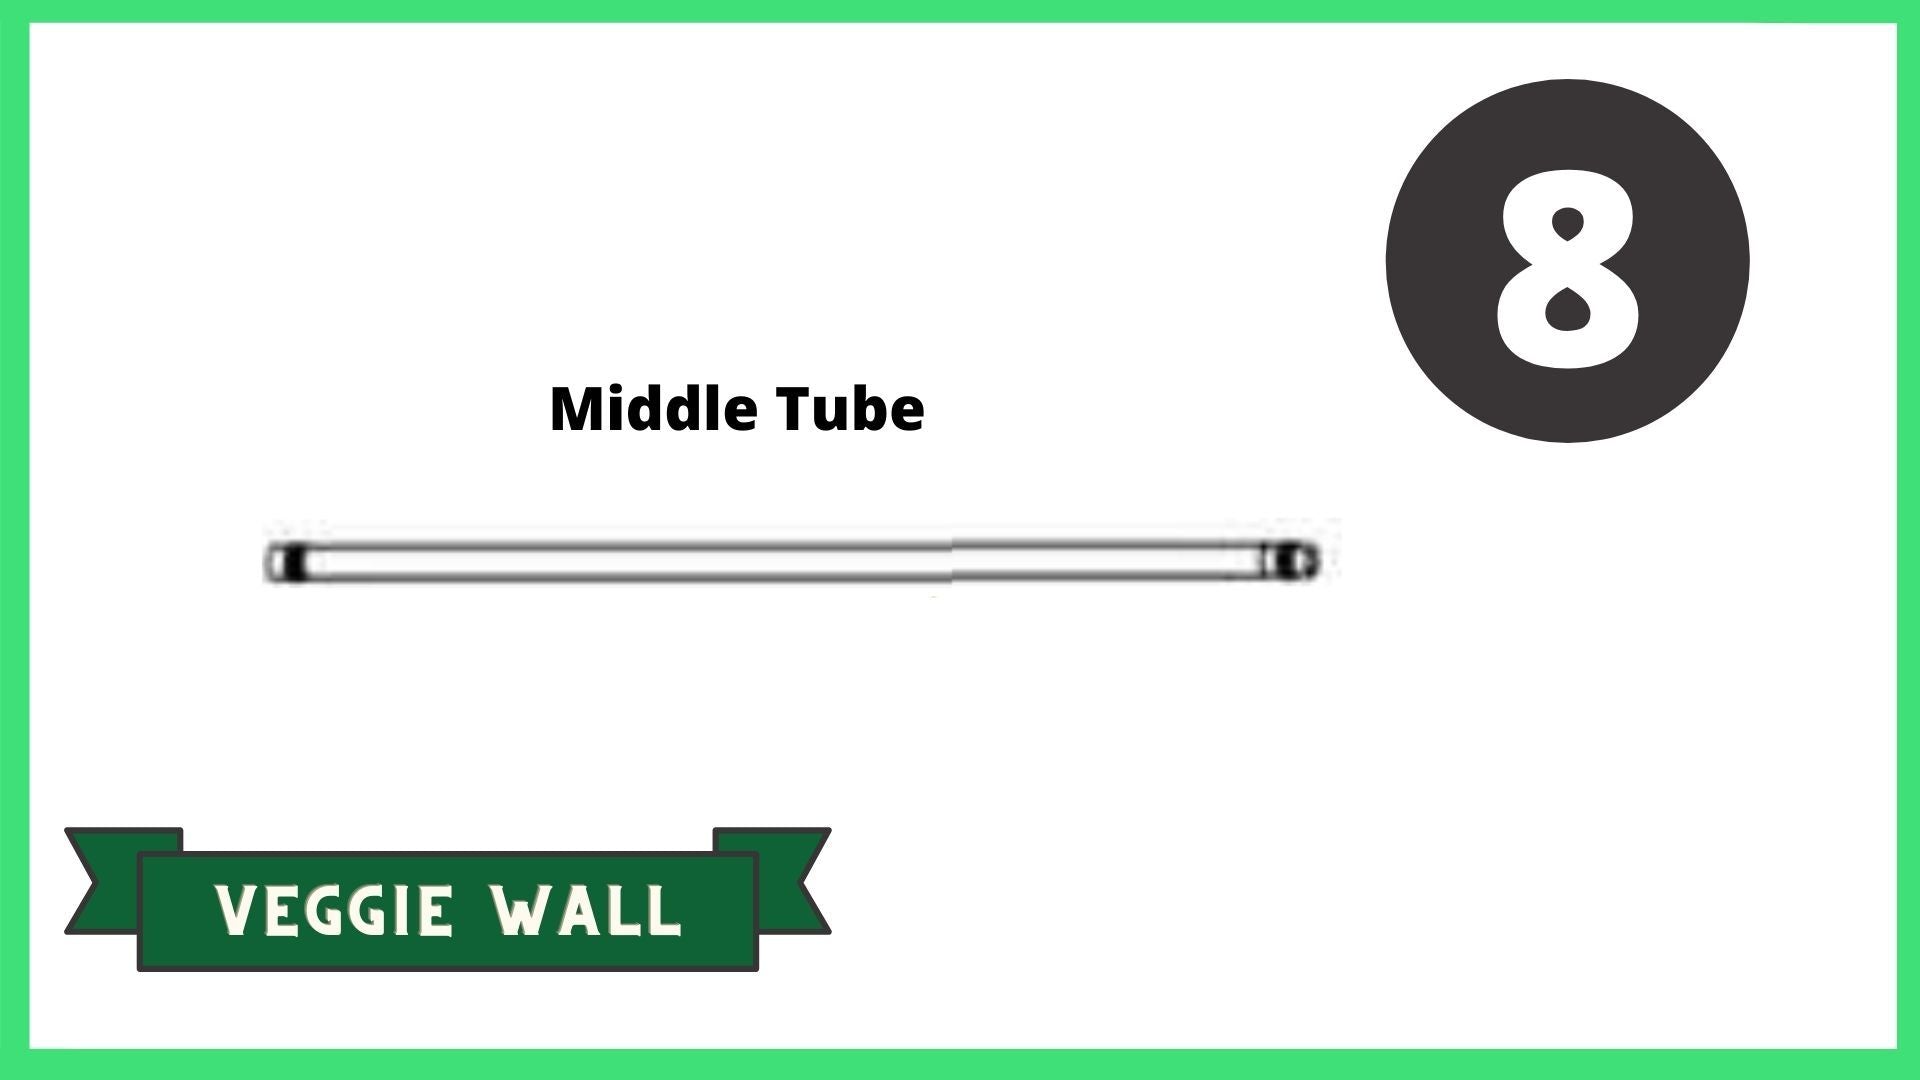 z-REPLACEMENT PARTS: Stack & Extend Veggie Wall Accessories Frame It All Part # 8 - Middle tube 